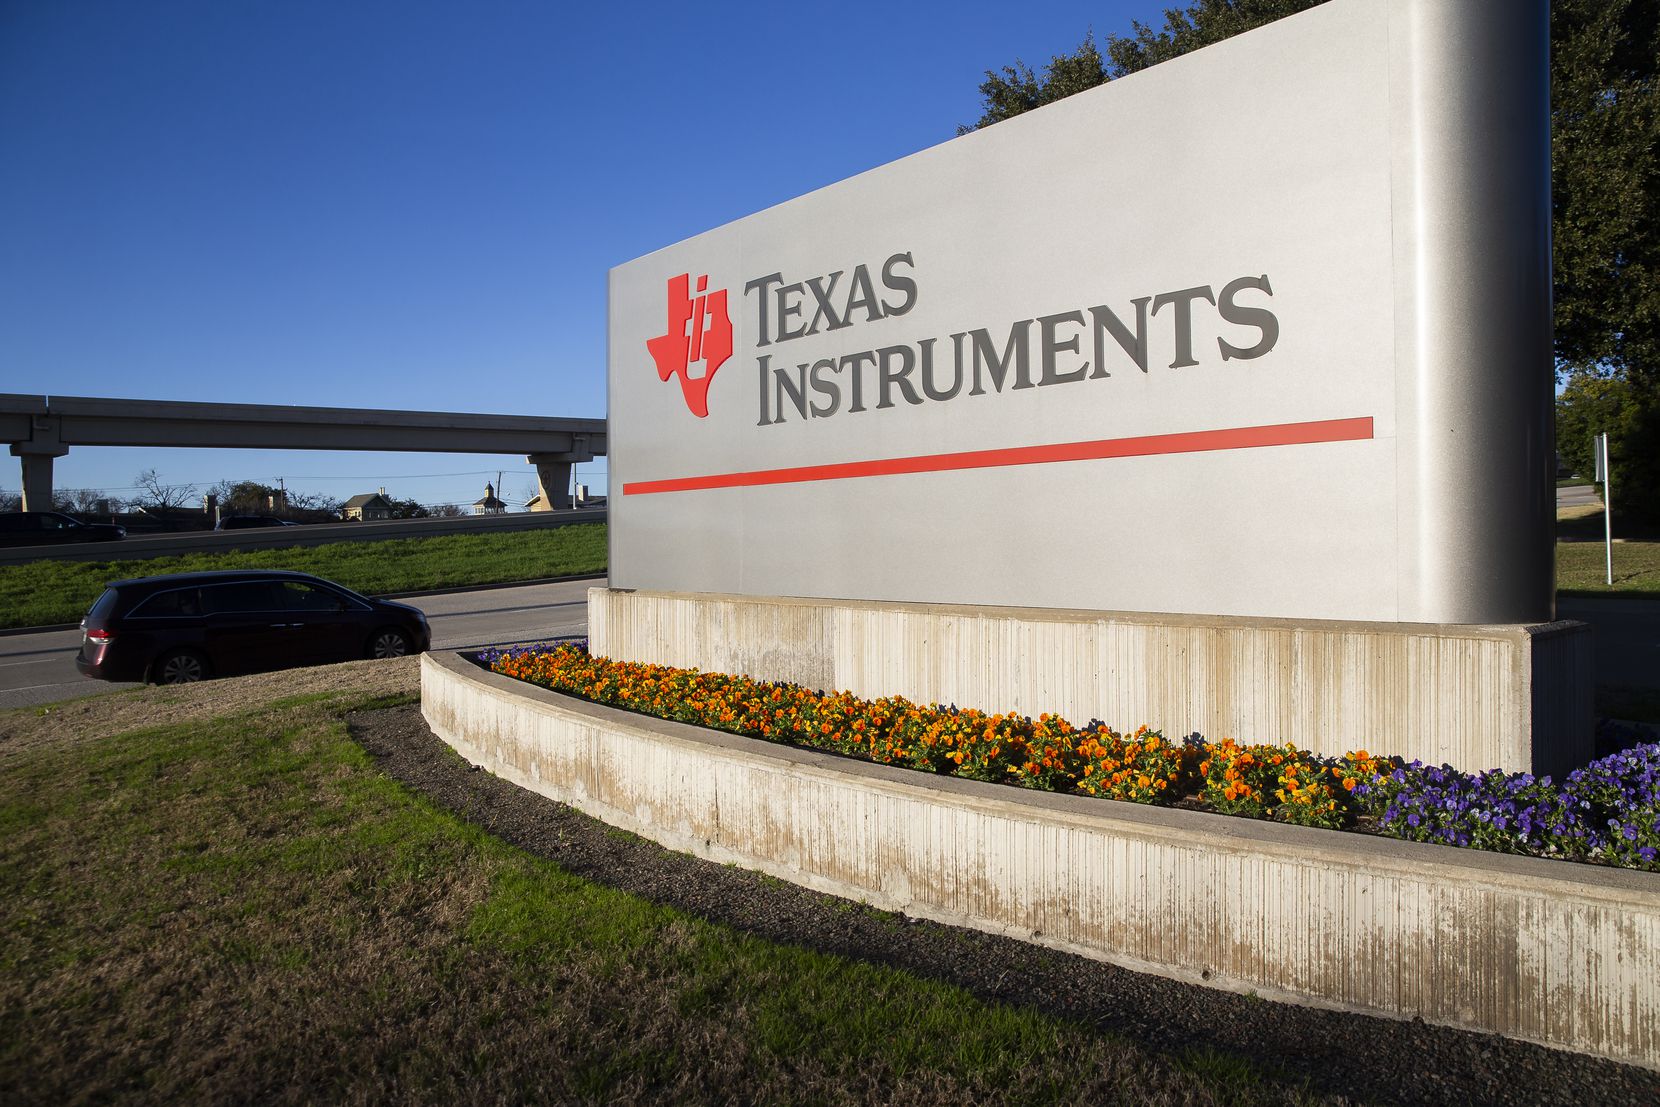 Dallas-based Texas Instruments said it's PAC "will not contribute to lawmakers that objected...